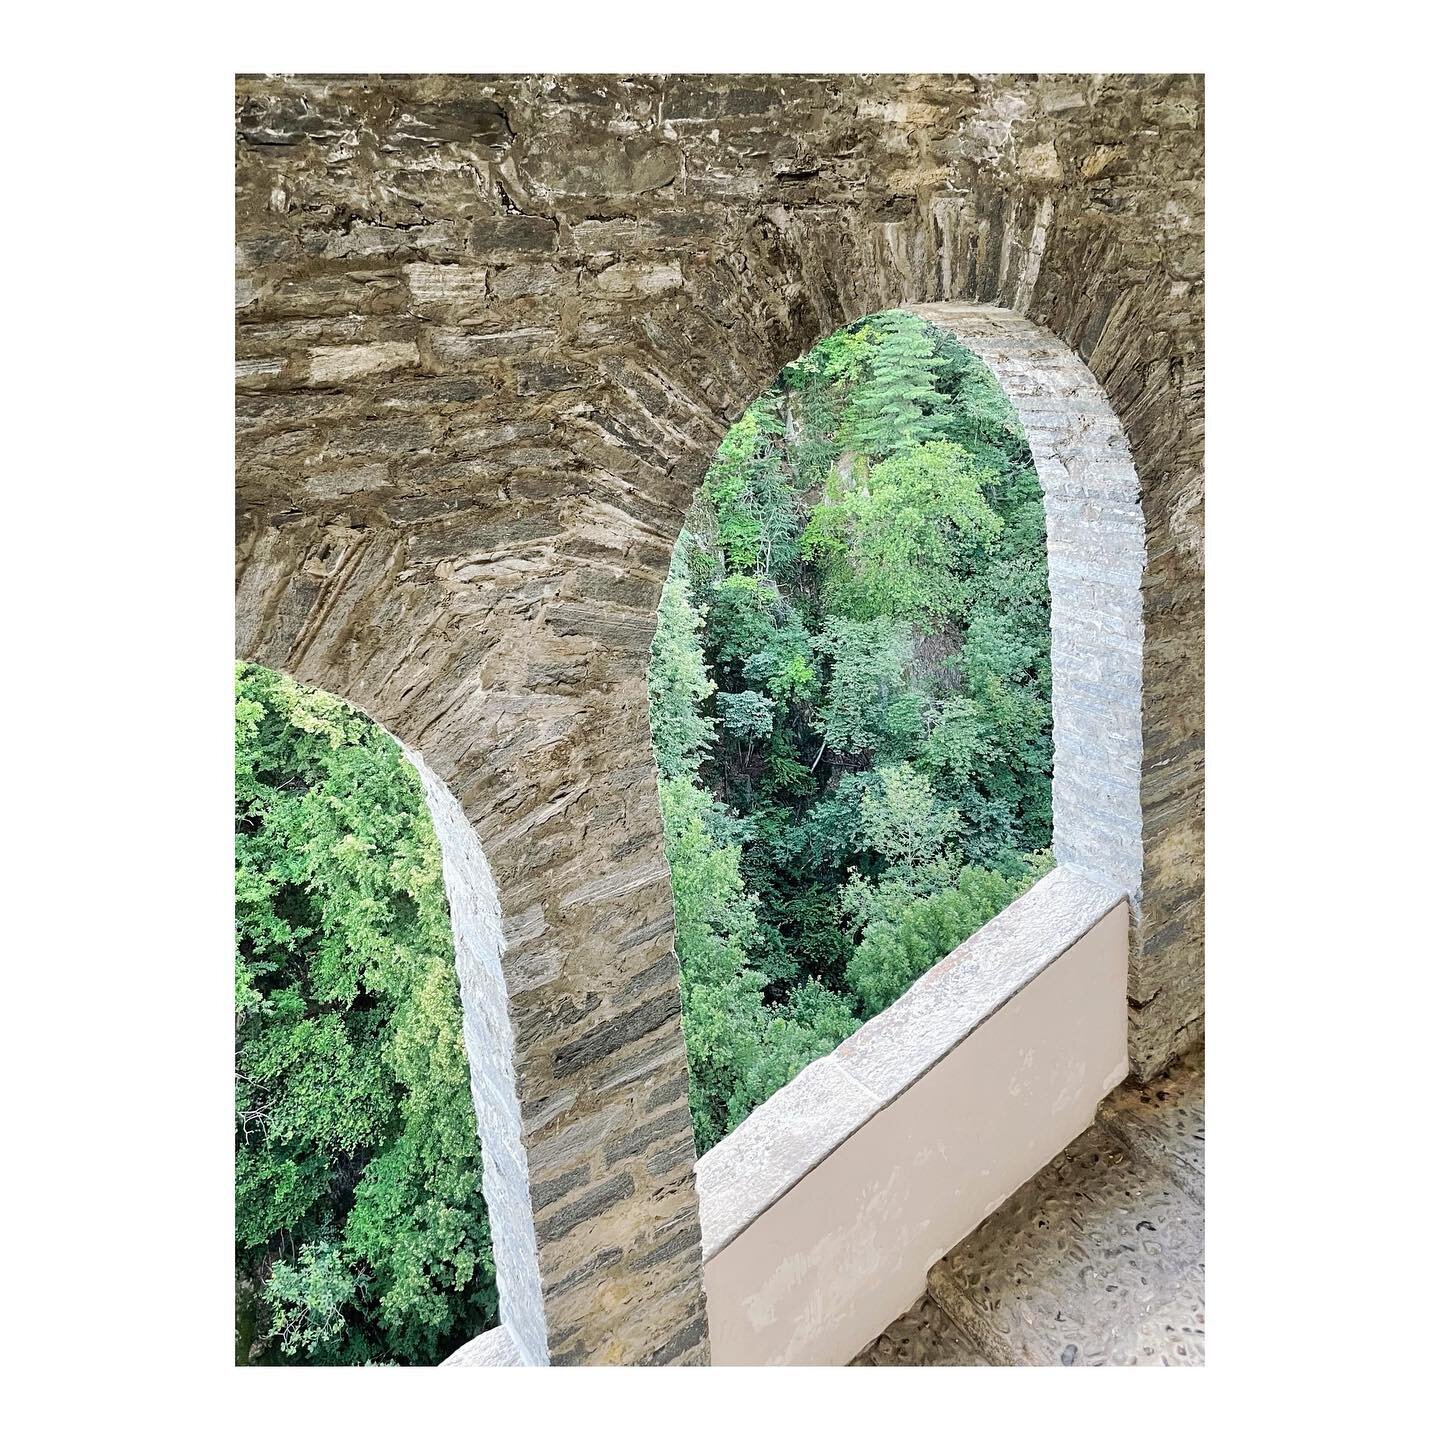 Window to Nature.
 
#madonnadelsasso 
#locarno
#ticinolover